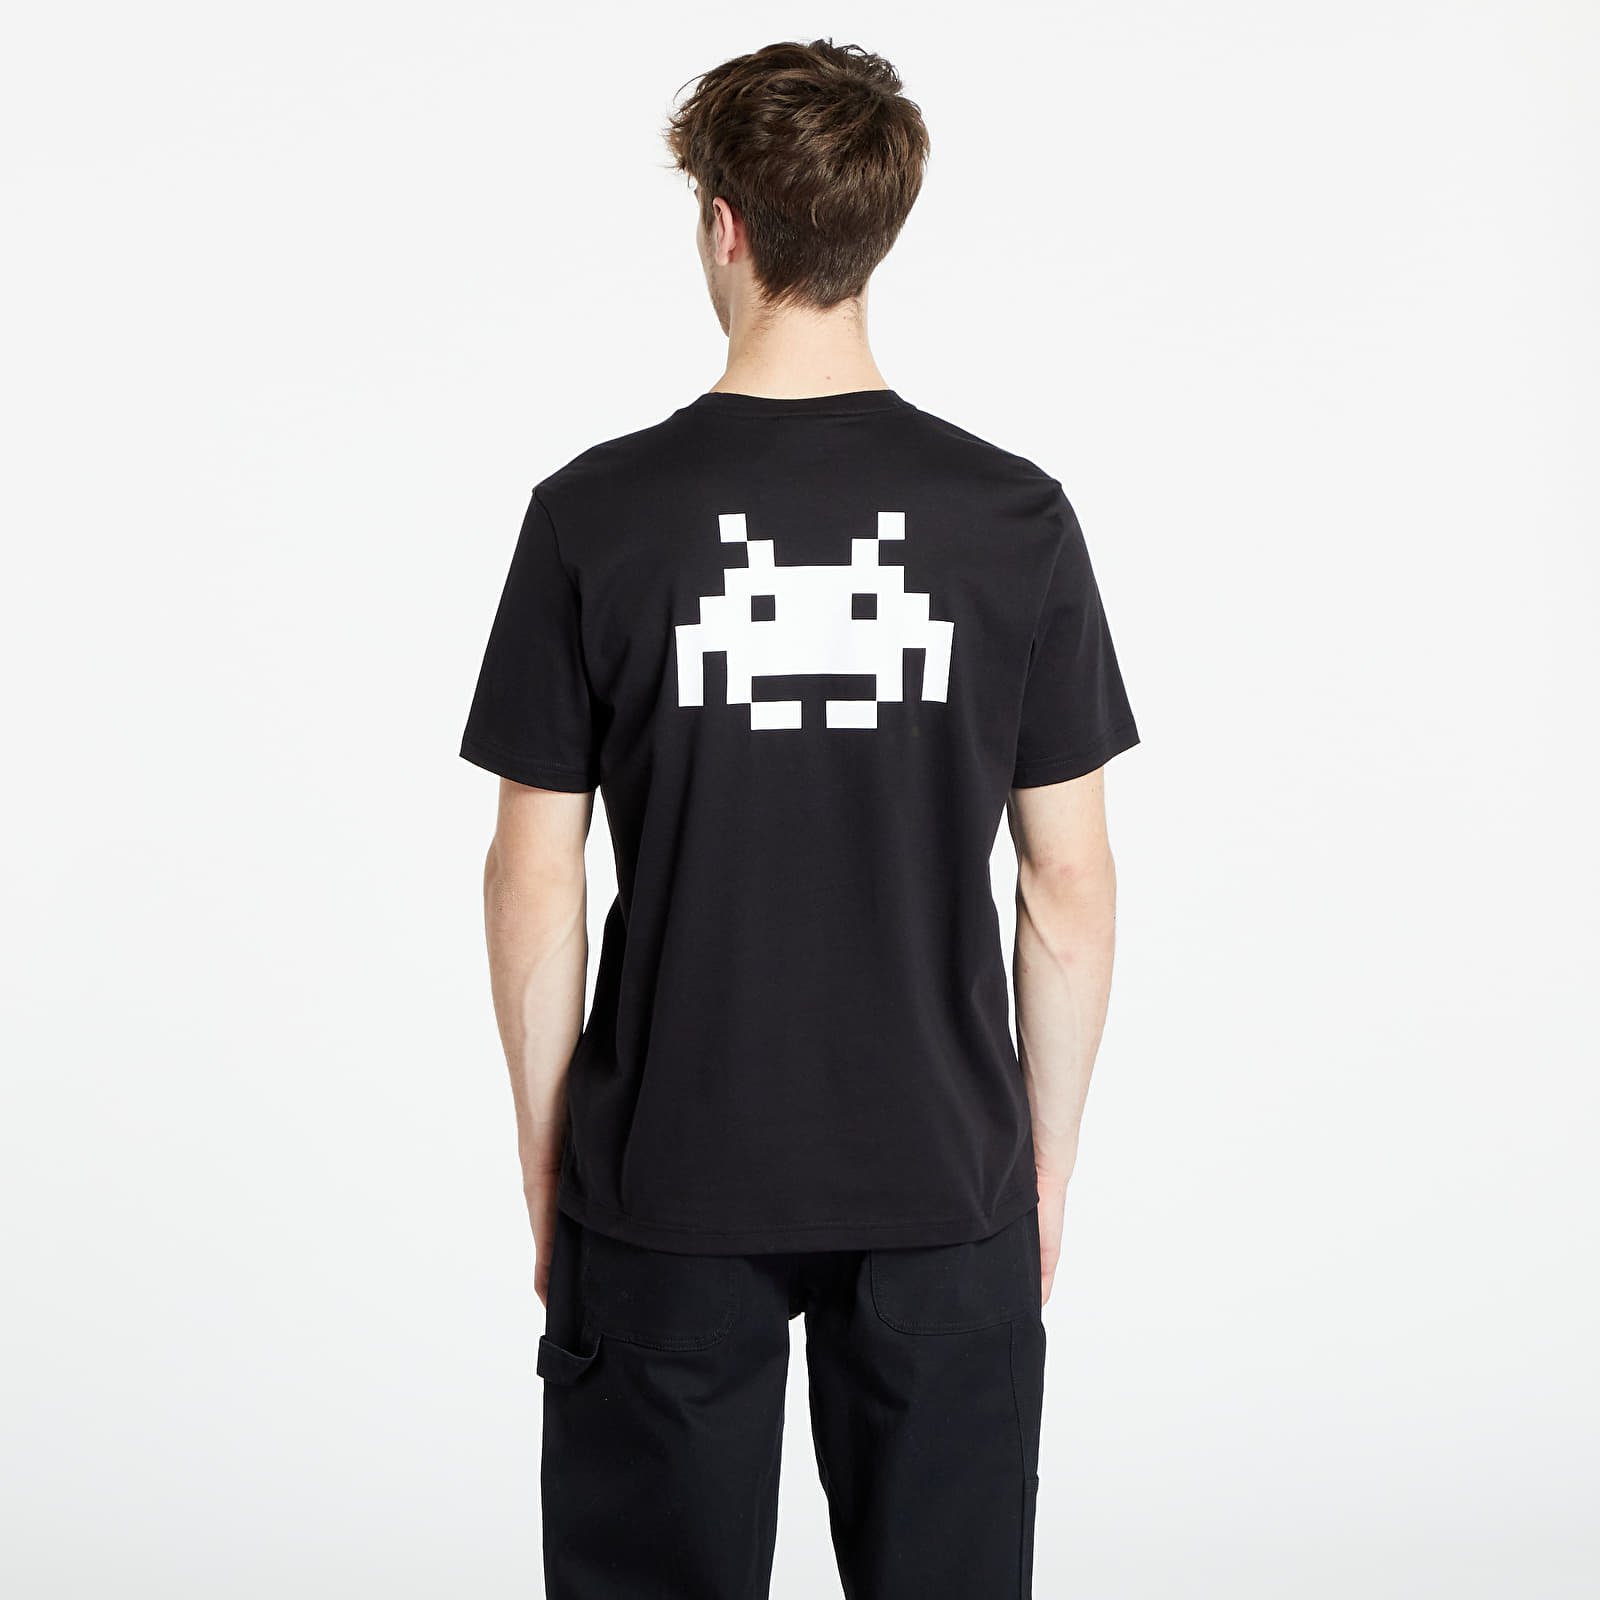 Space Invaders x Crewneck T-Shirt